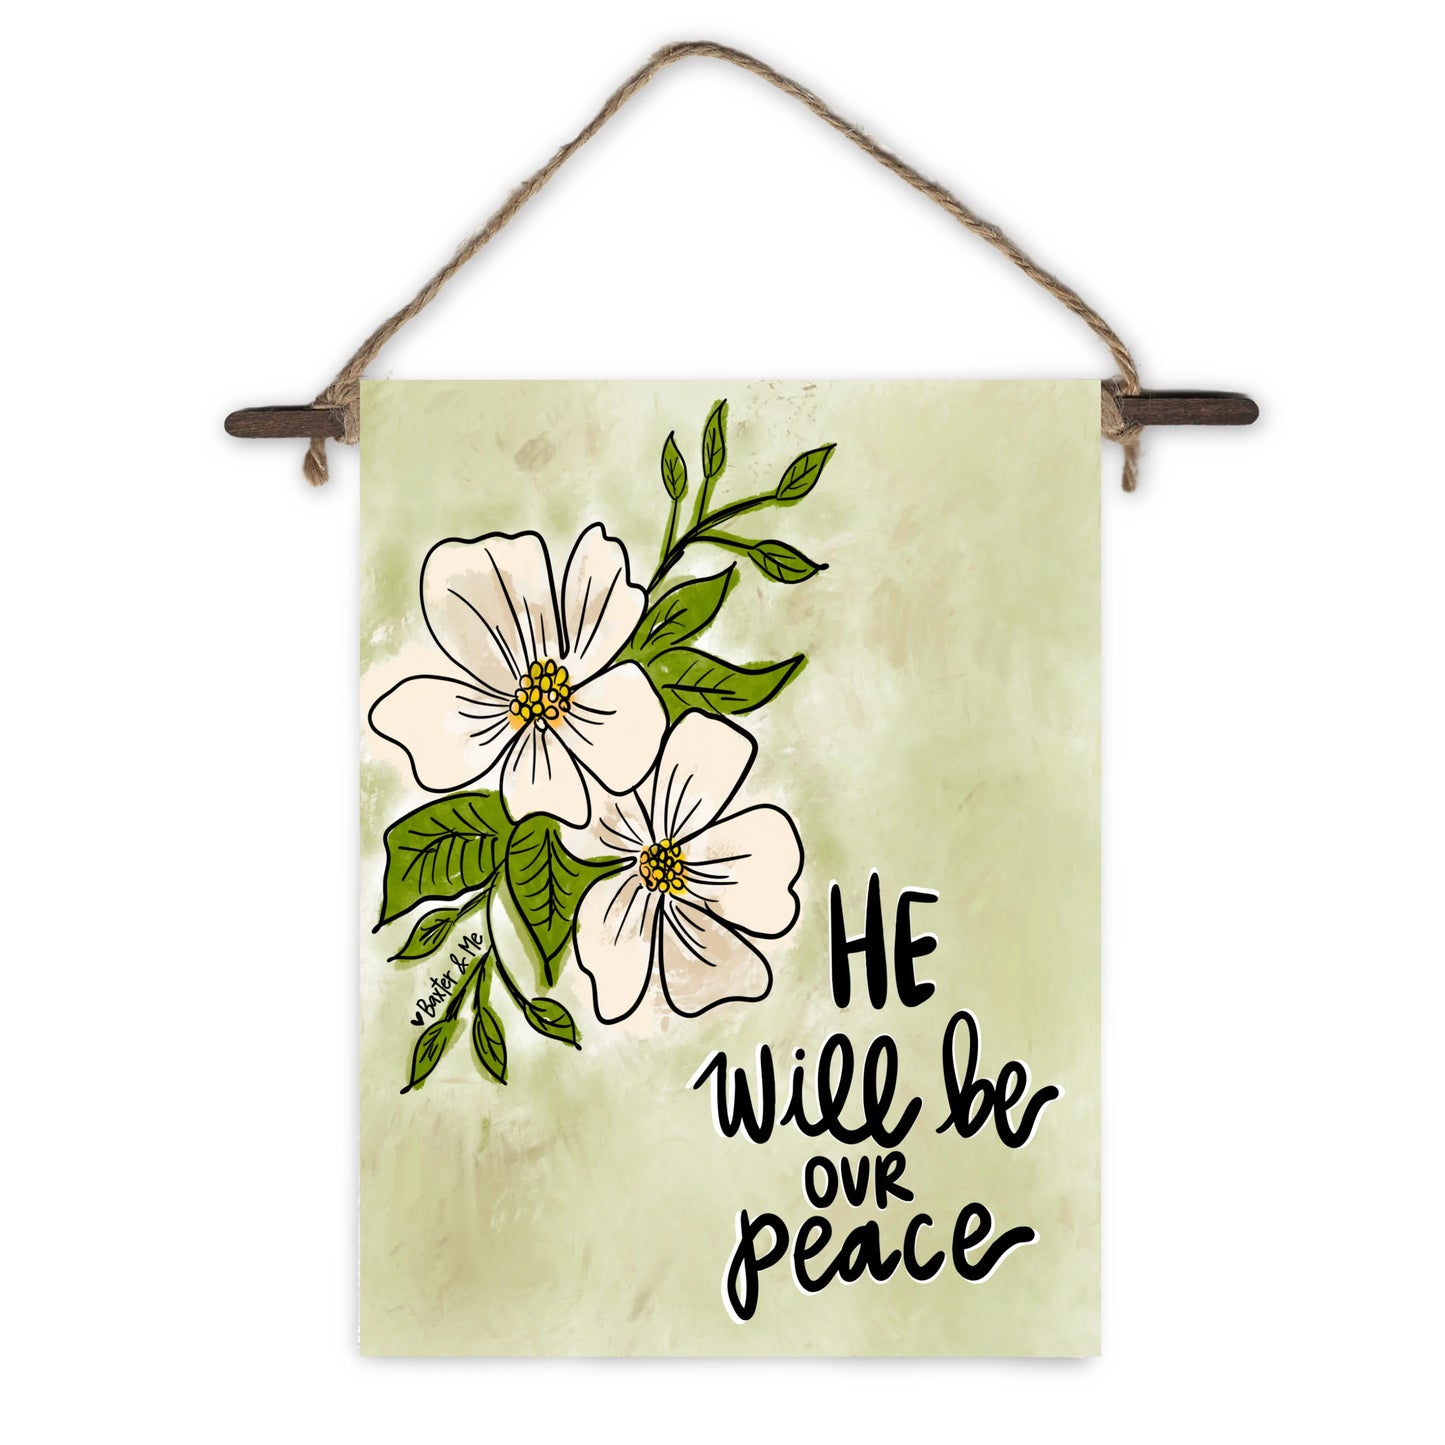 Our Peace Mini Wall Hanging